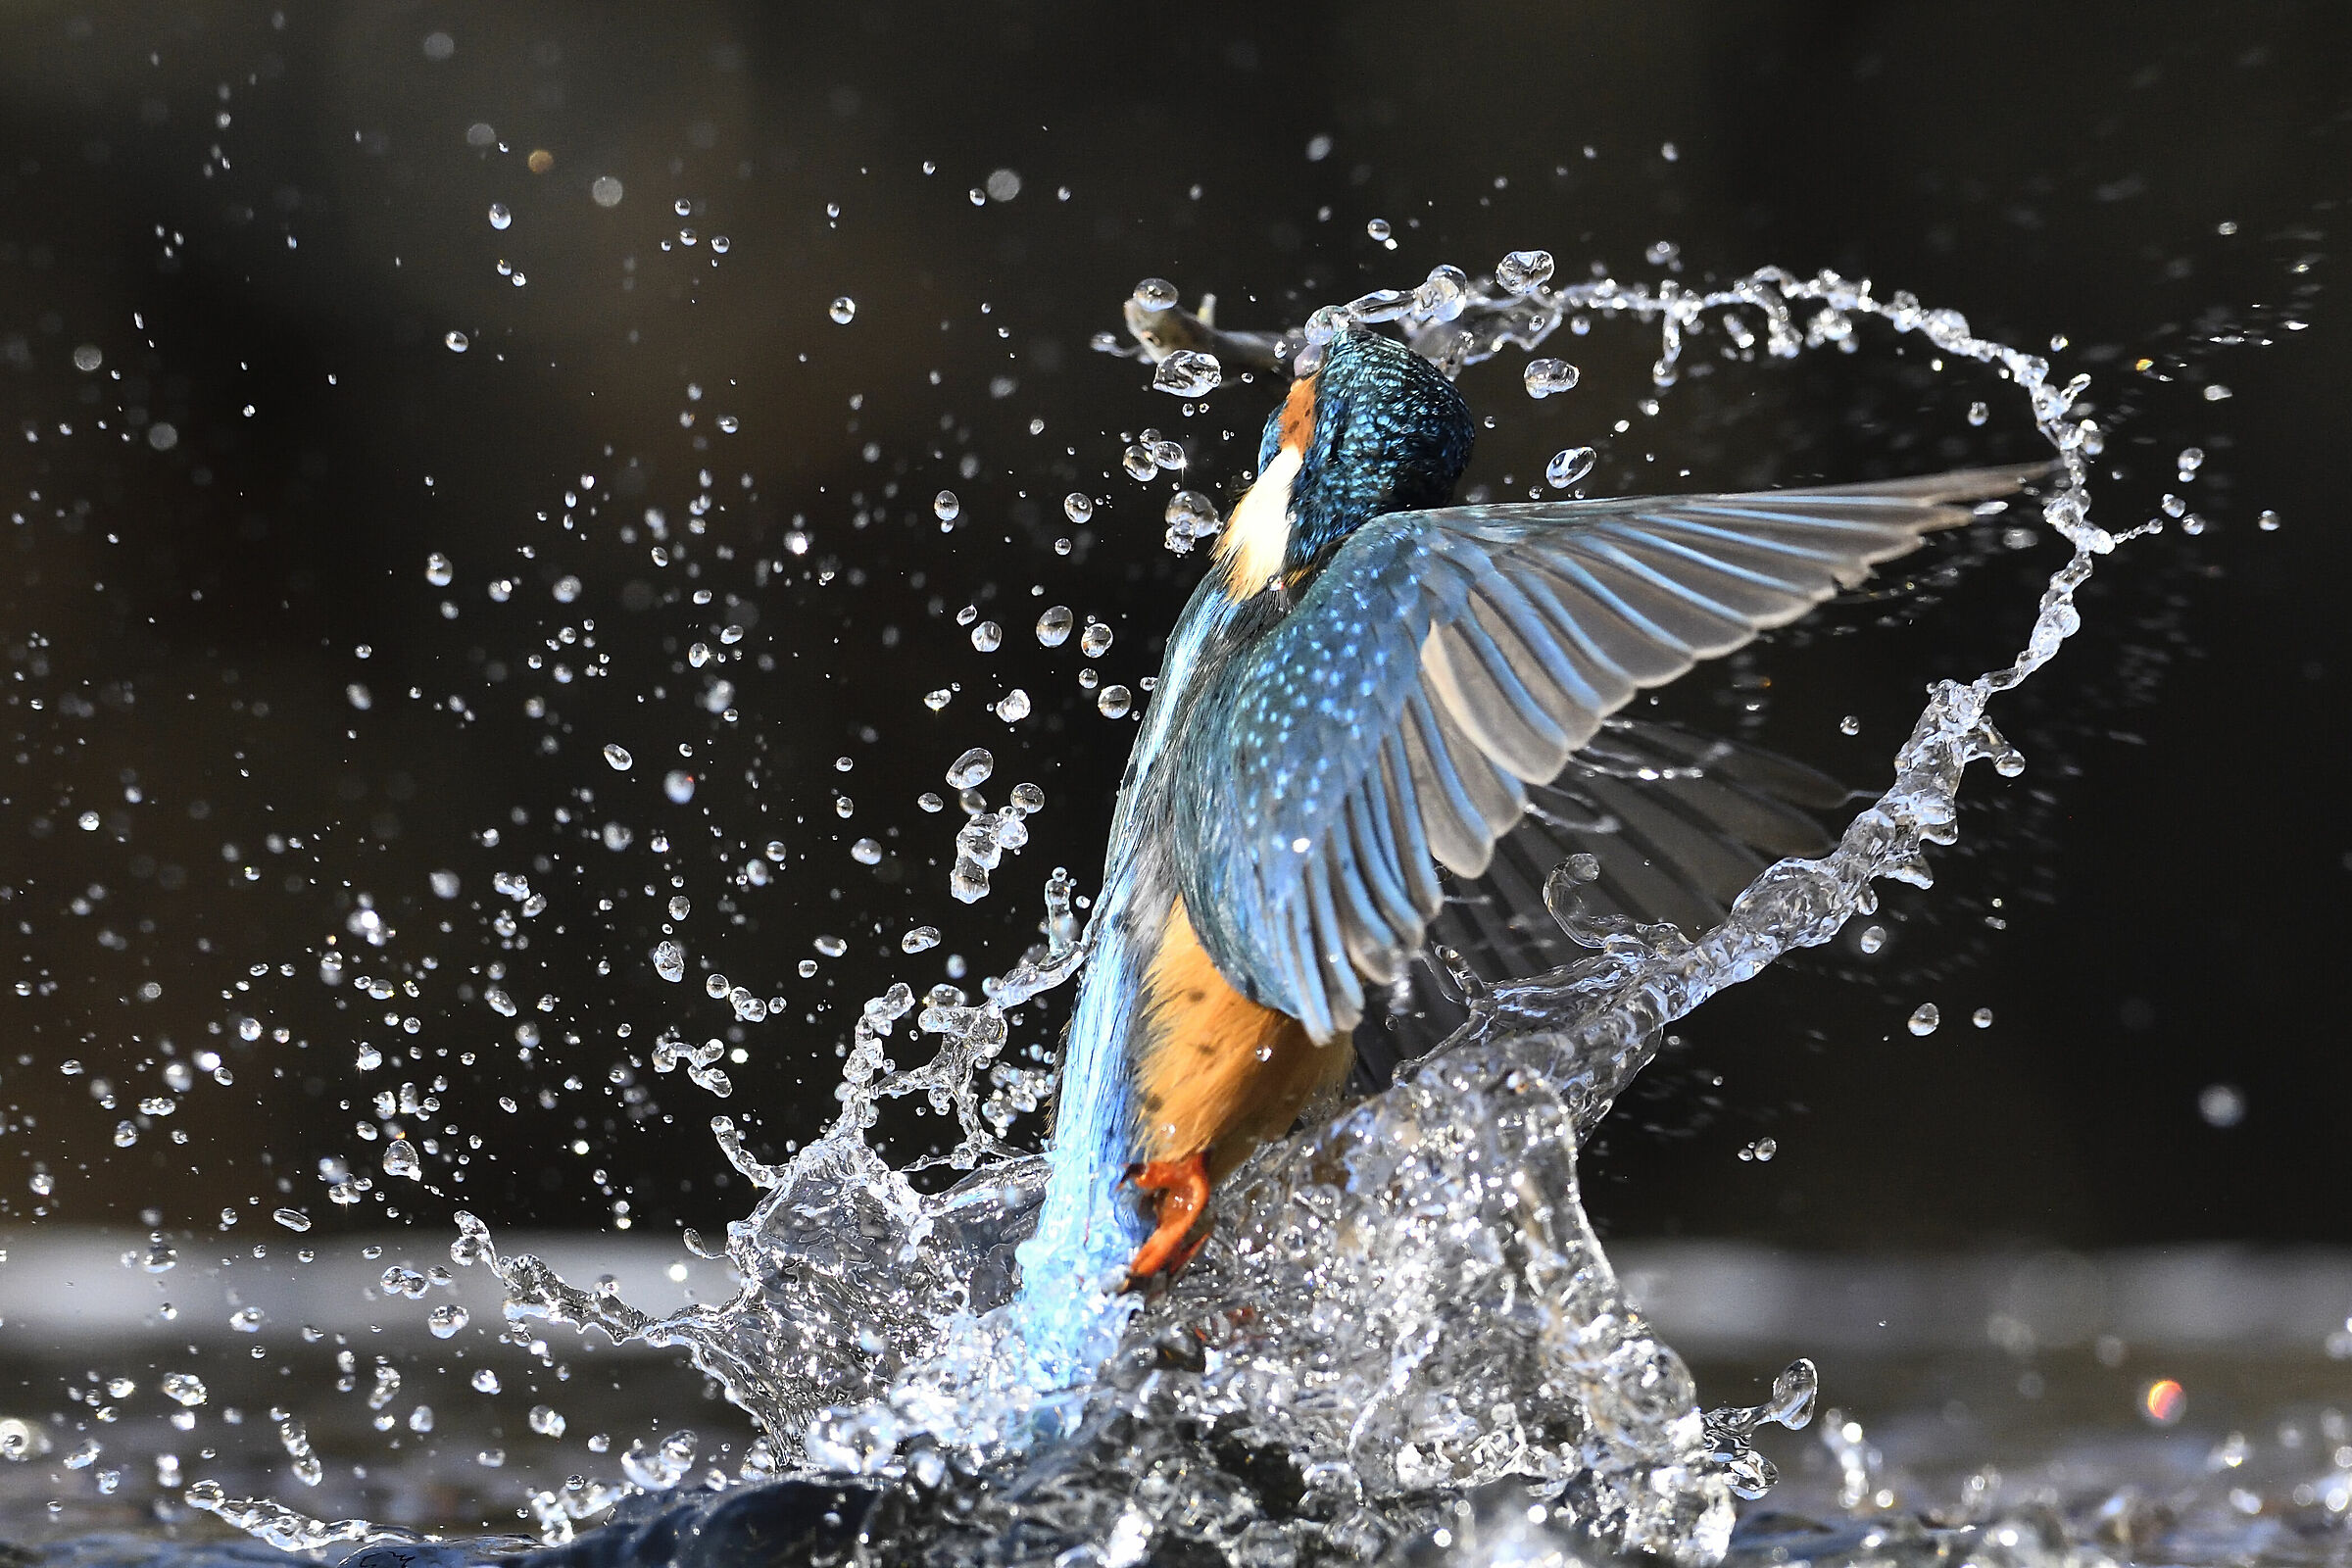 The emergence of the Kingfisher ...